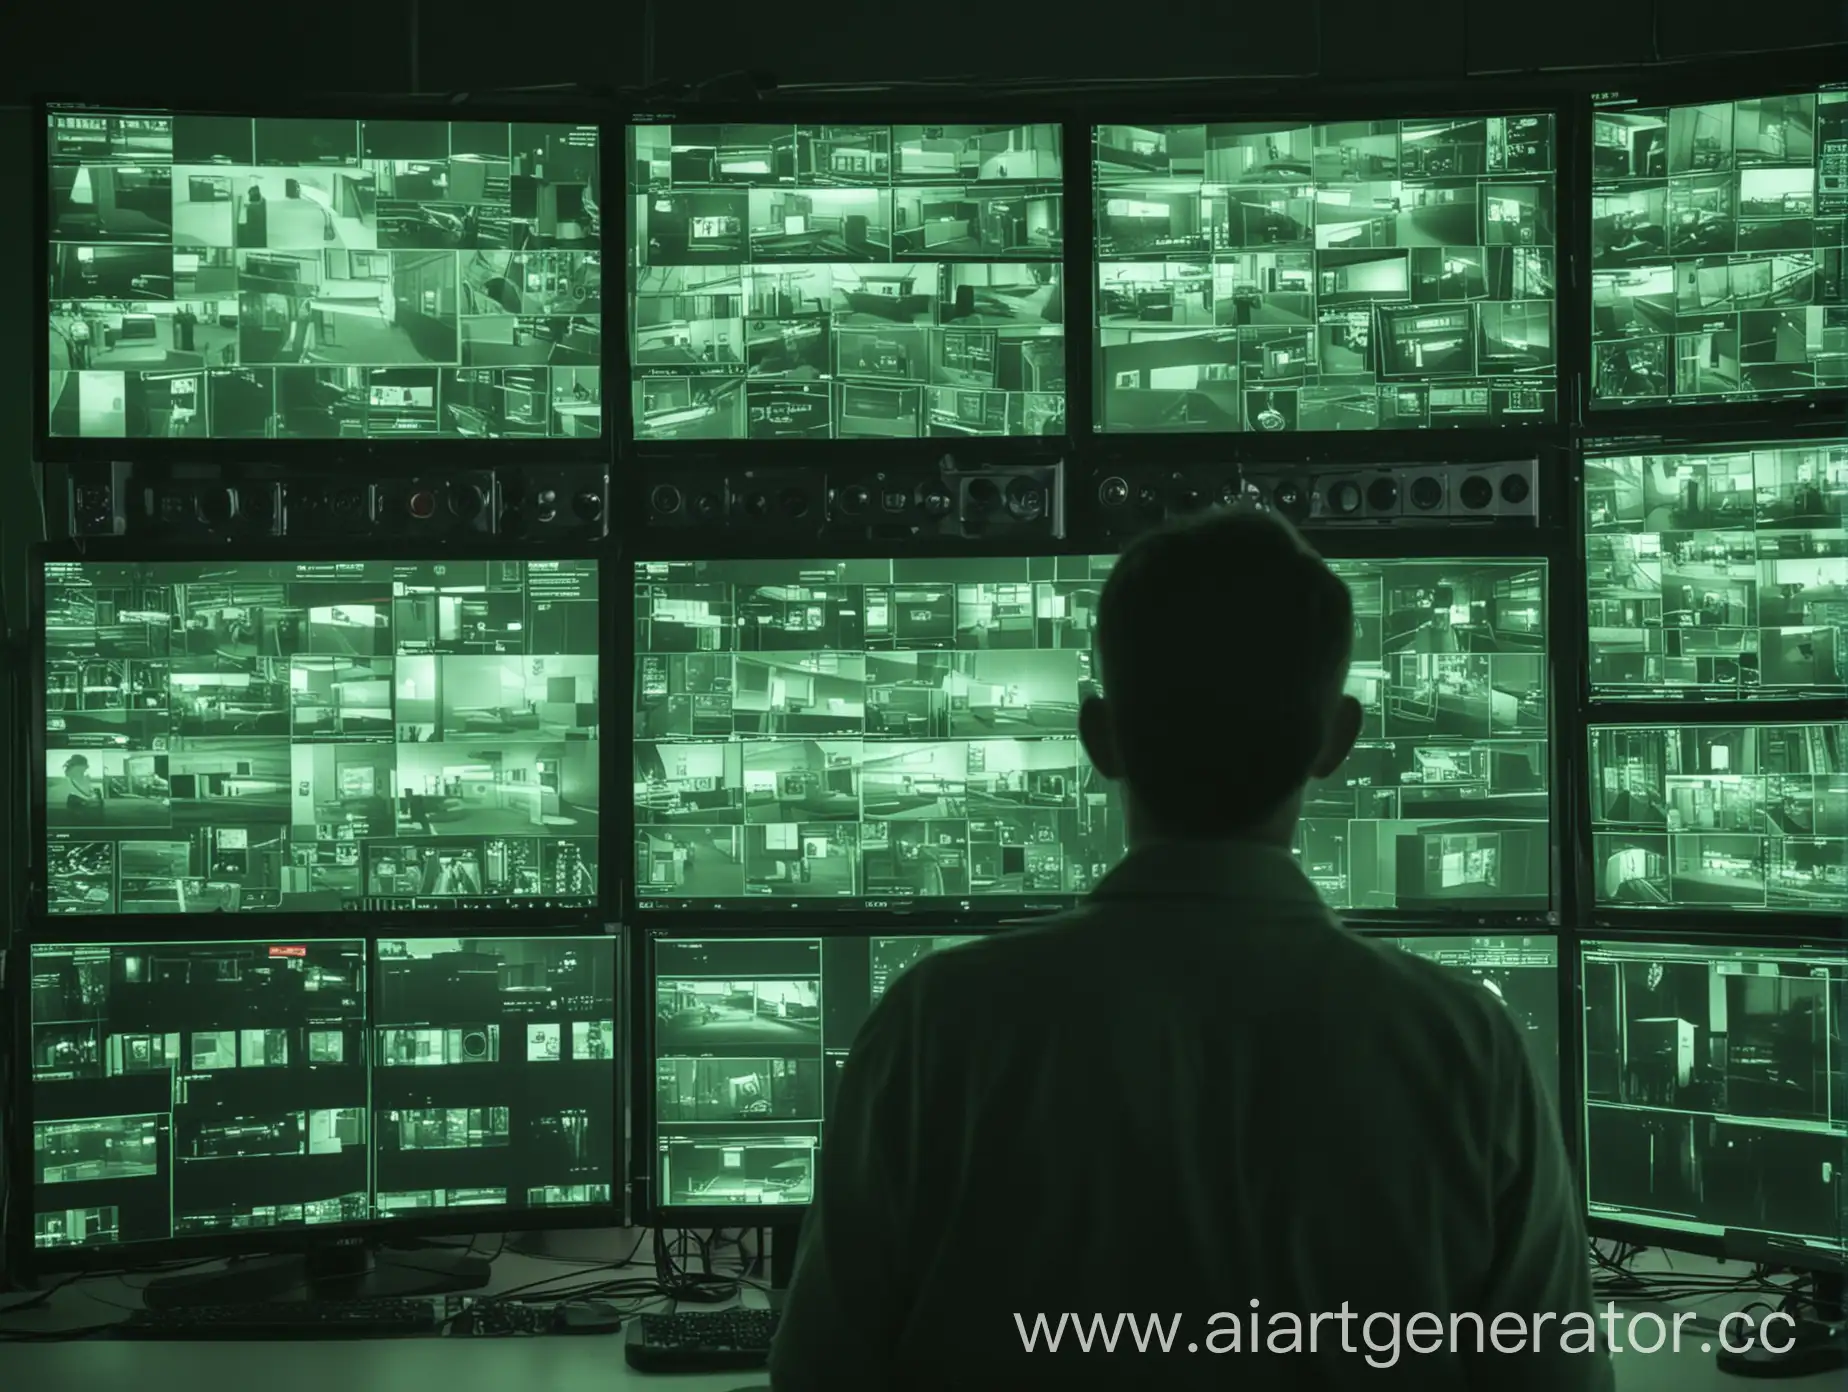 Security-Personnel-Monitoring-HighTech-Surveillance-Footage-with-GreenTinted-Screens